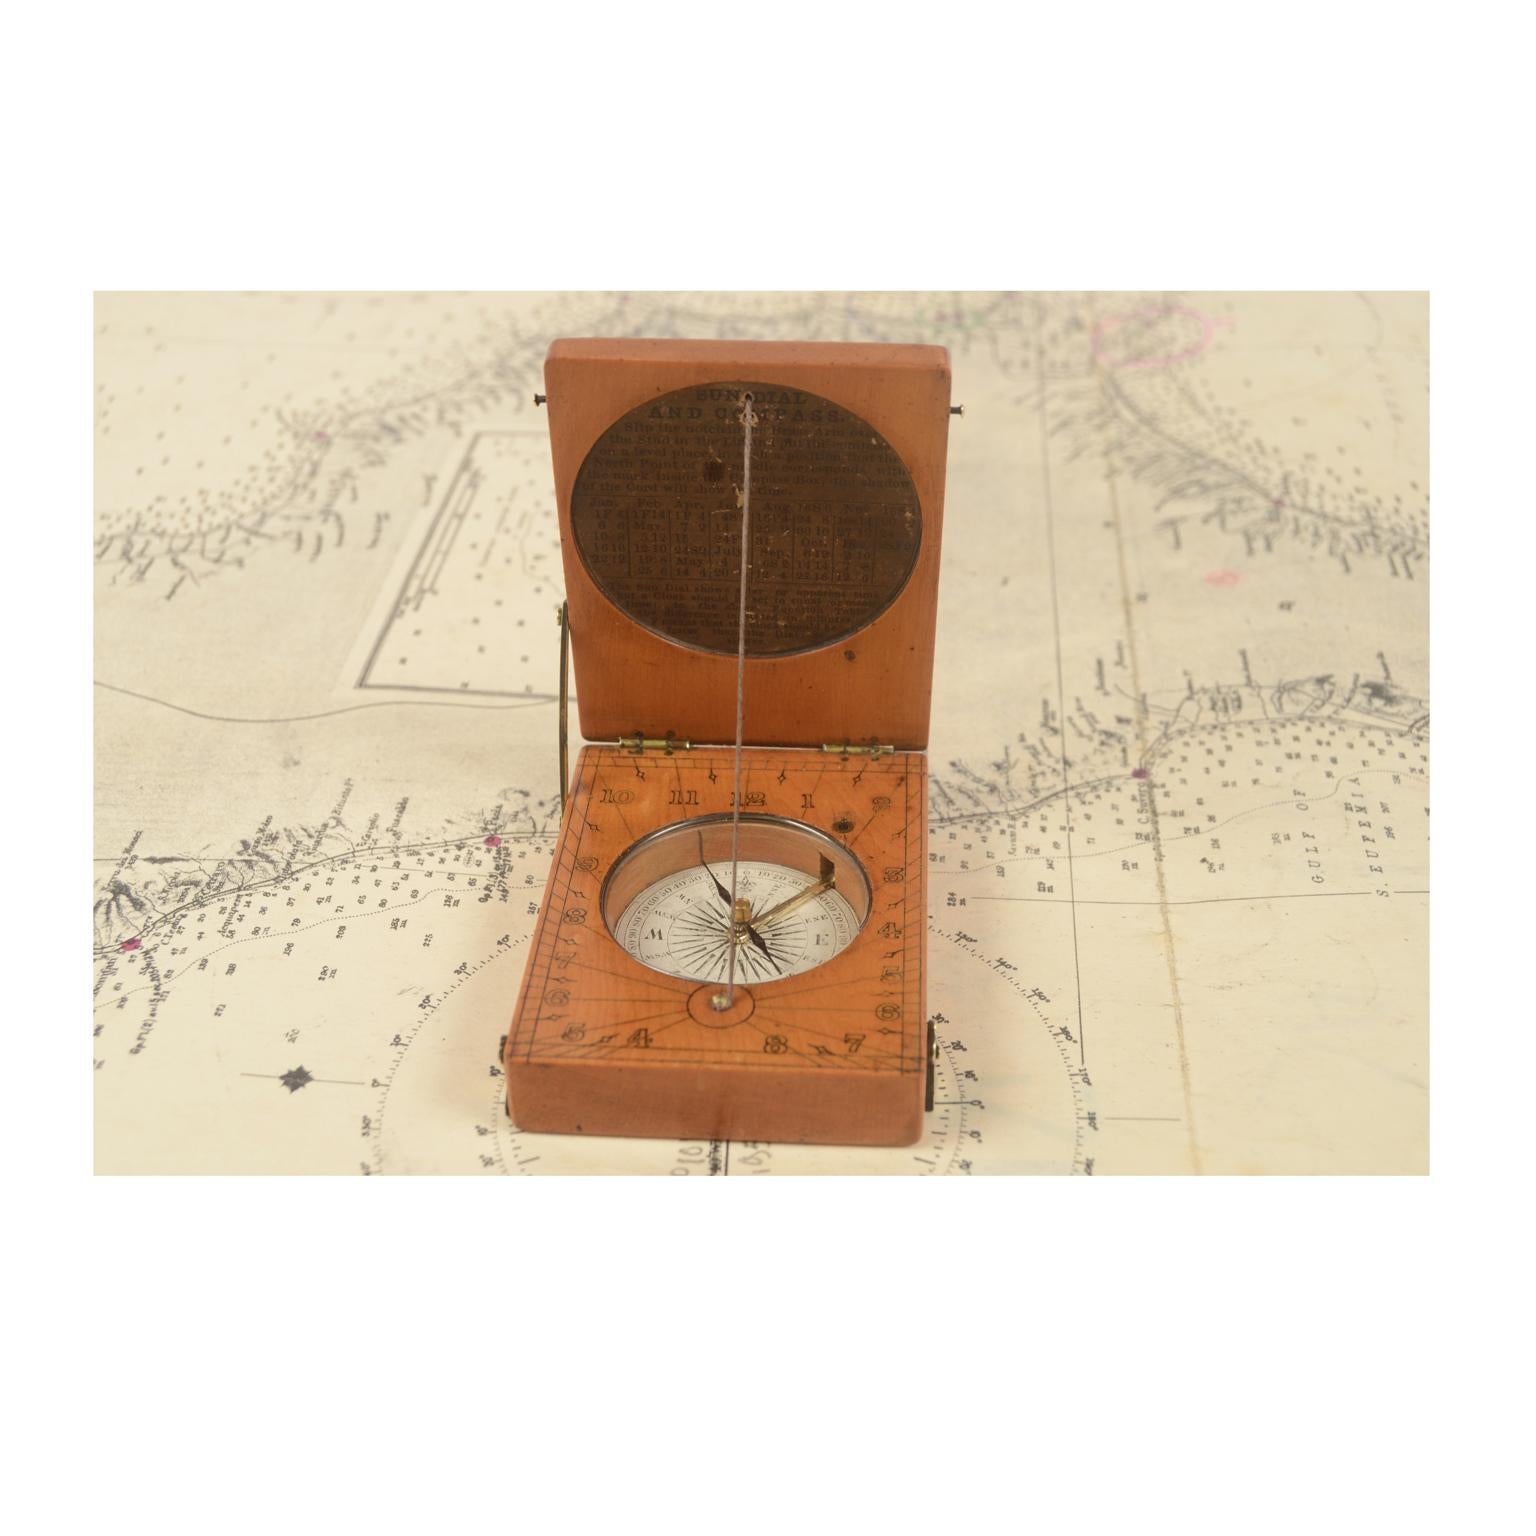 Engraved Boxwood Sundial English Manufacture of the 18th Century 1